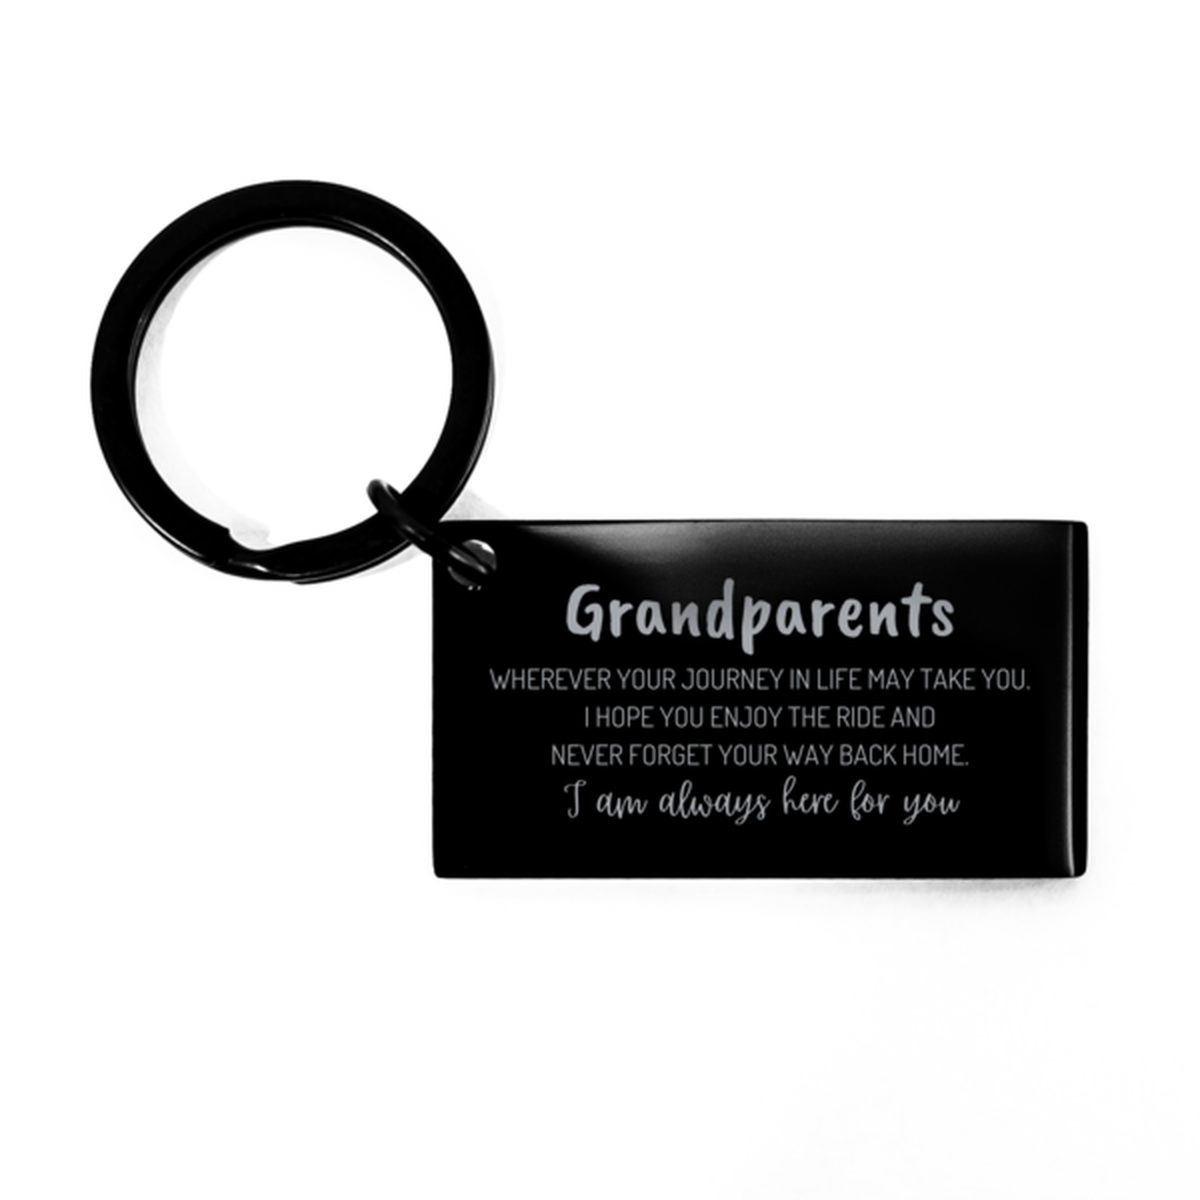 Grandparents wherever your journey in life may take you, I am always here for you Grandparents Keychain, Awesome Christmas Gifts For Grandparents, Grandparents Birthday Gifts for Men Women Family Loved One